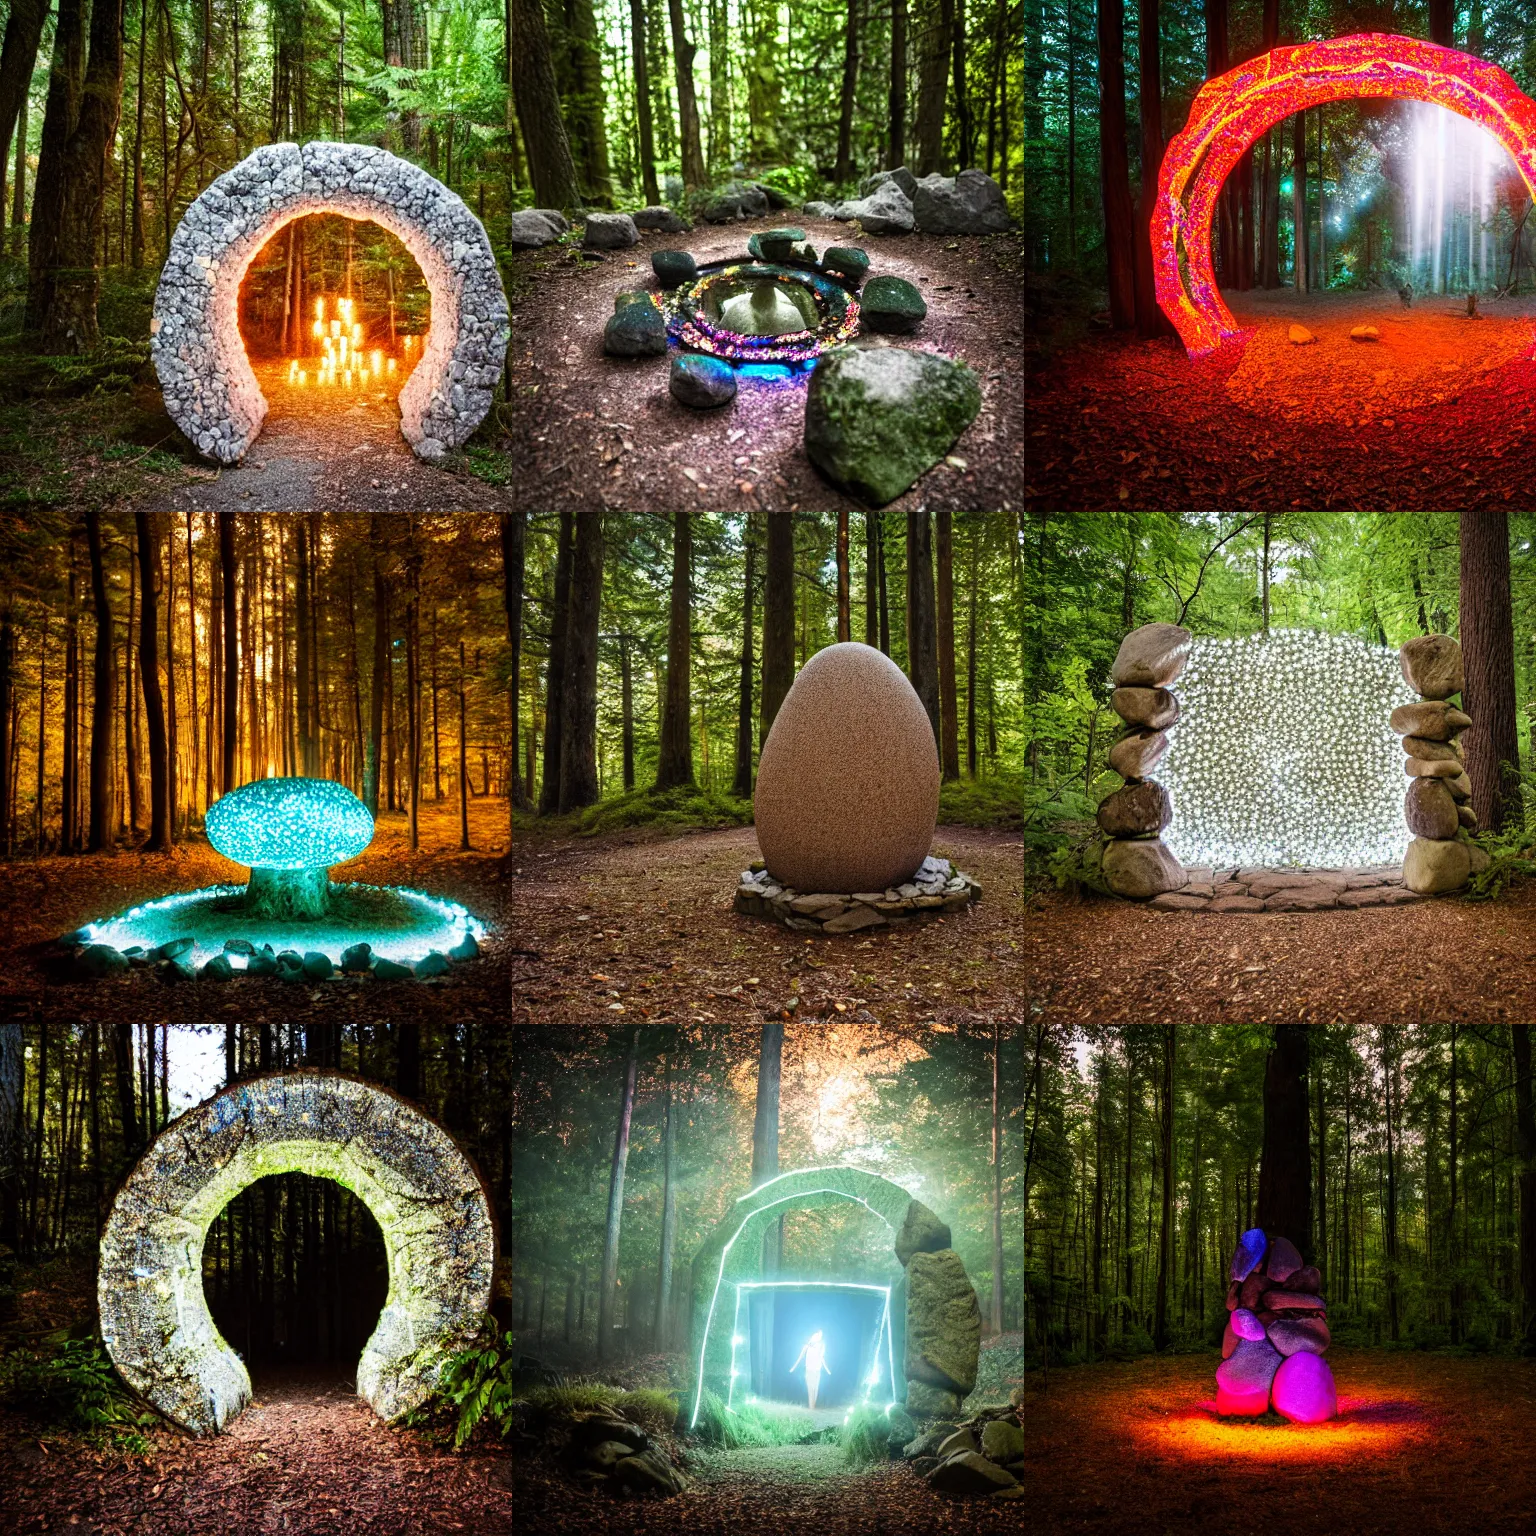 Prompt: Glowing magical portal made of stones in the forest, taken with Sony a7R camera